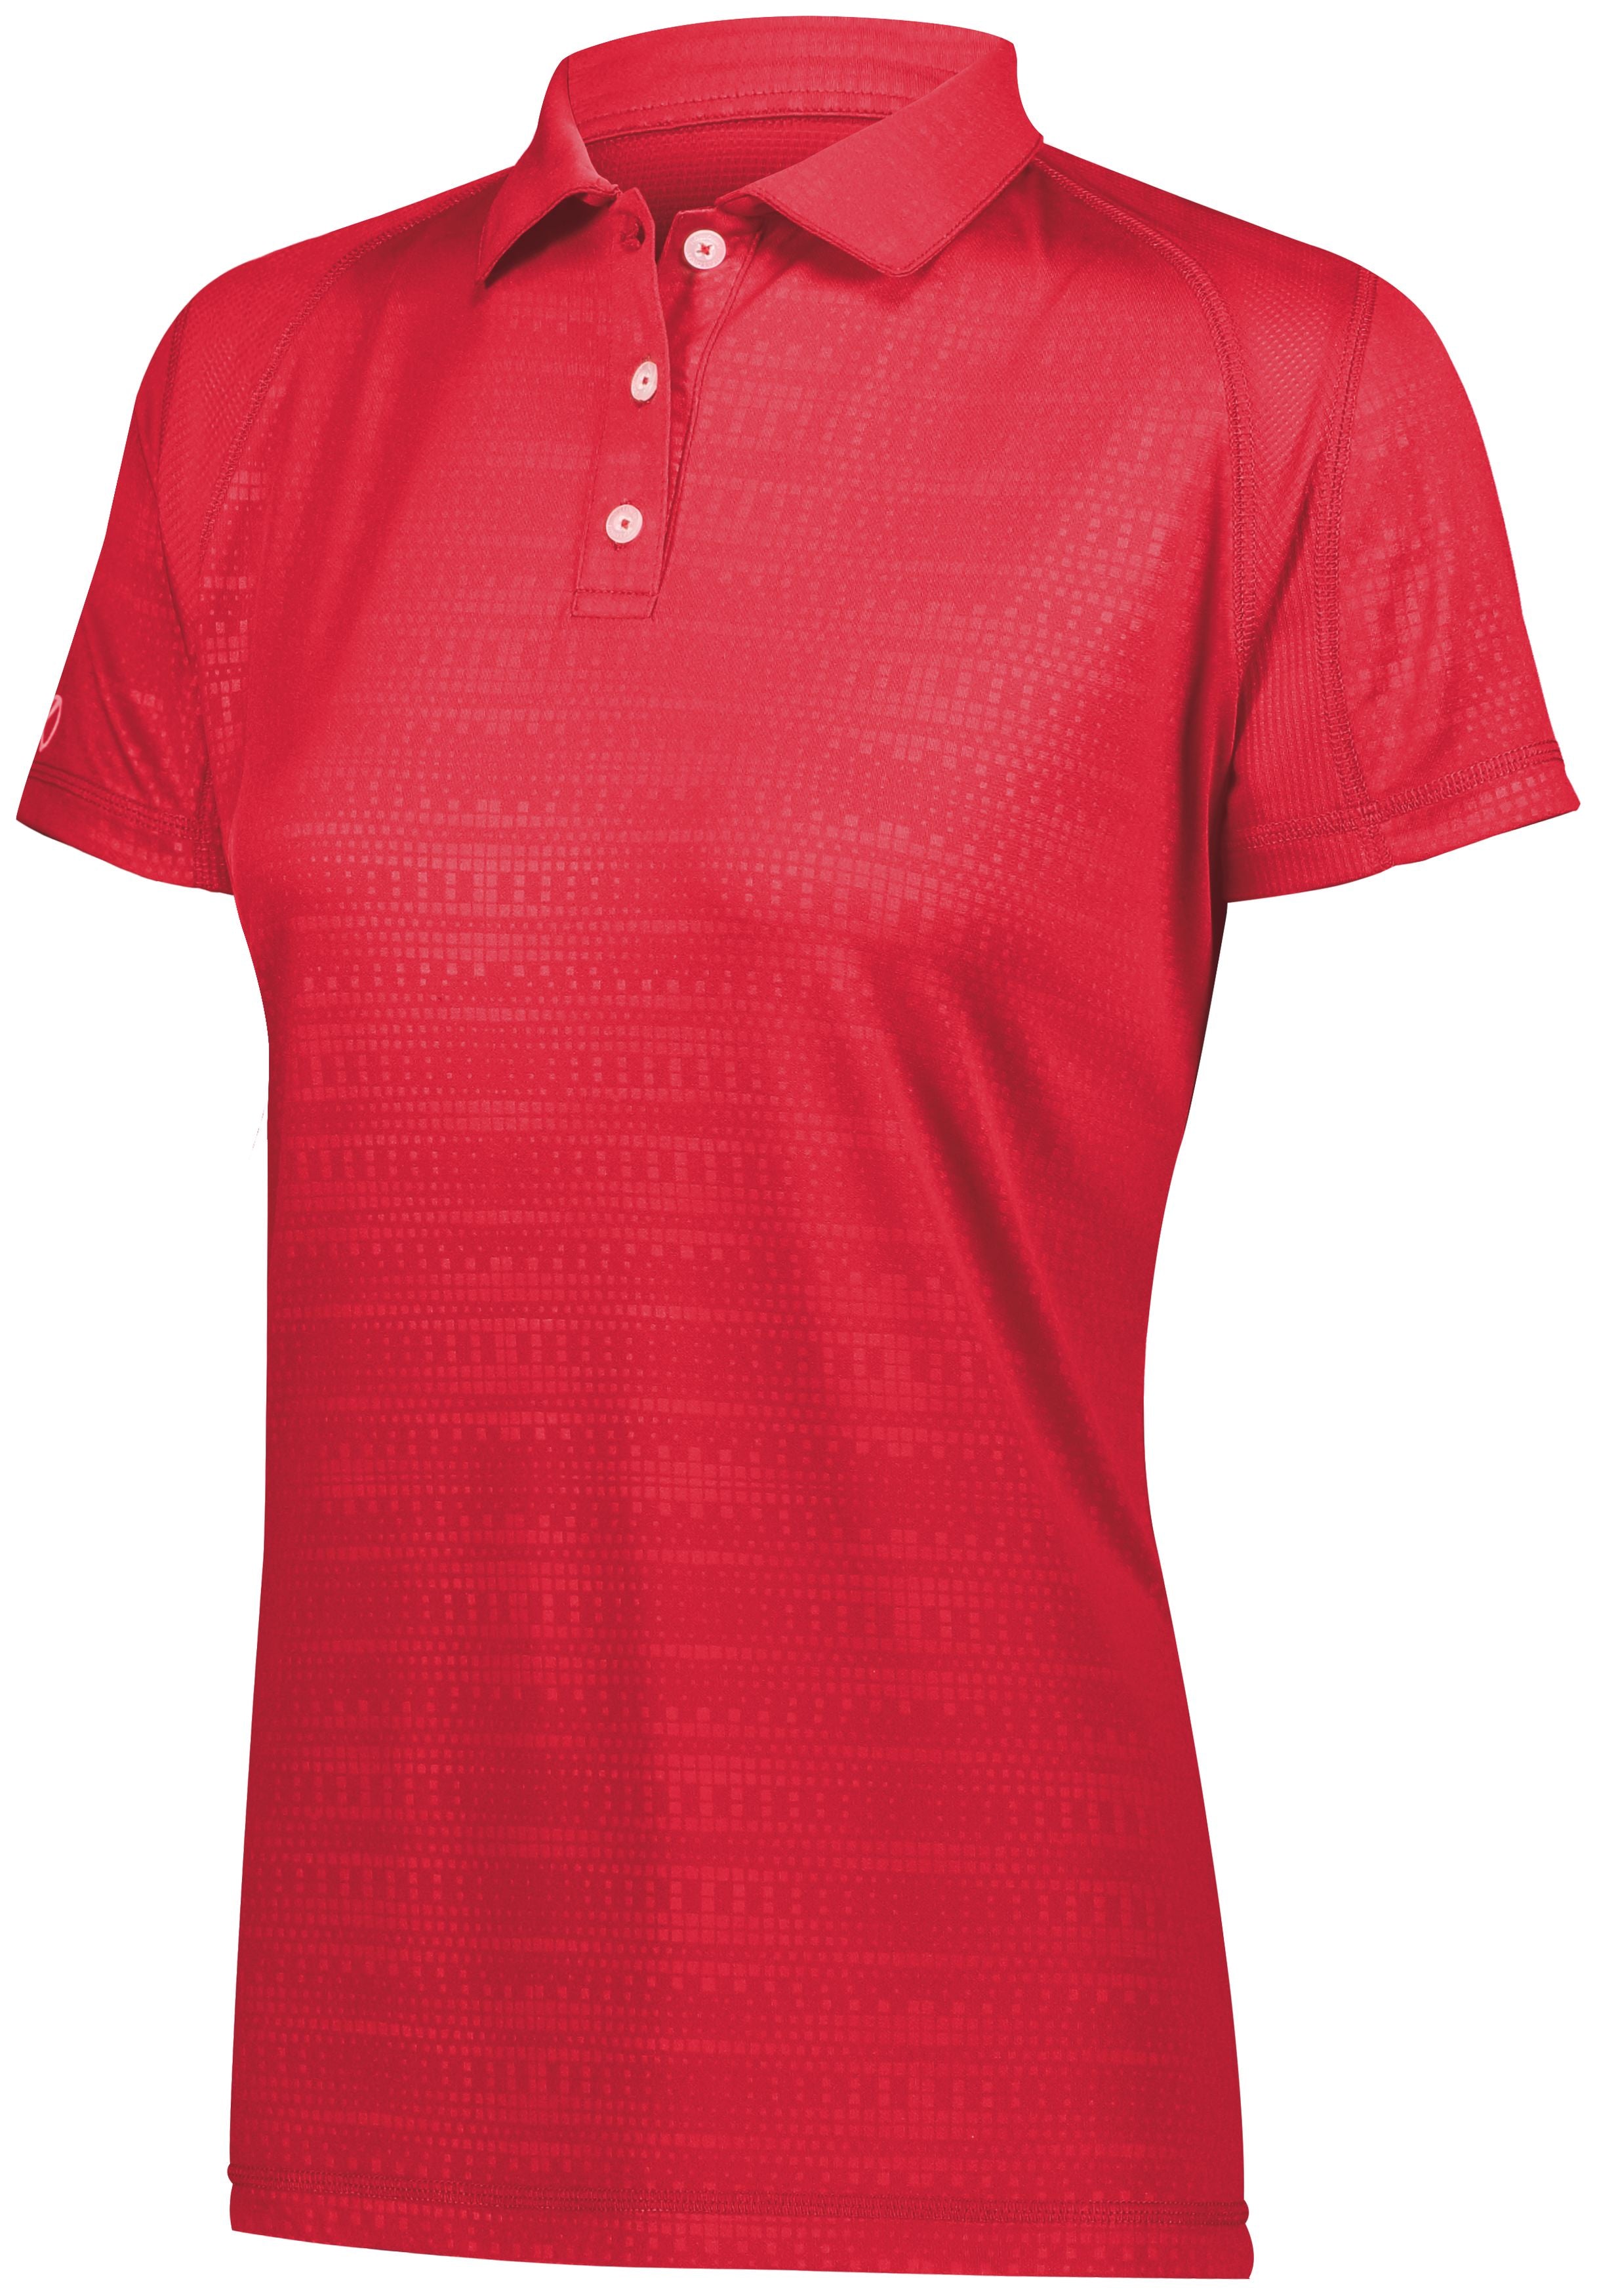 Holloway Ladies Converge Polo in Scarlet  -Part of the Ladies, Ladies-Polo, Polos, Holloway, Shirts, Converge-Collection product lines at KanaleyCreations.com